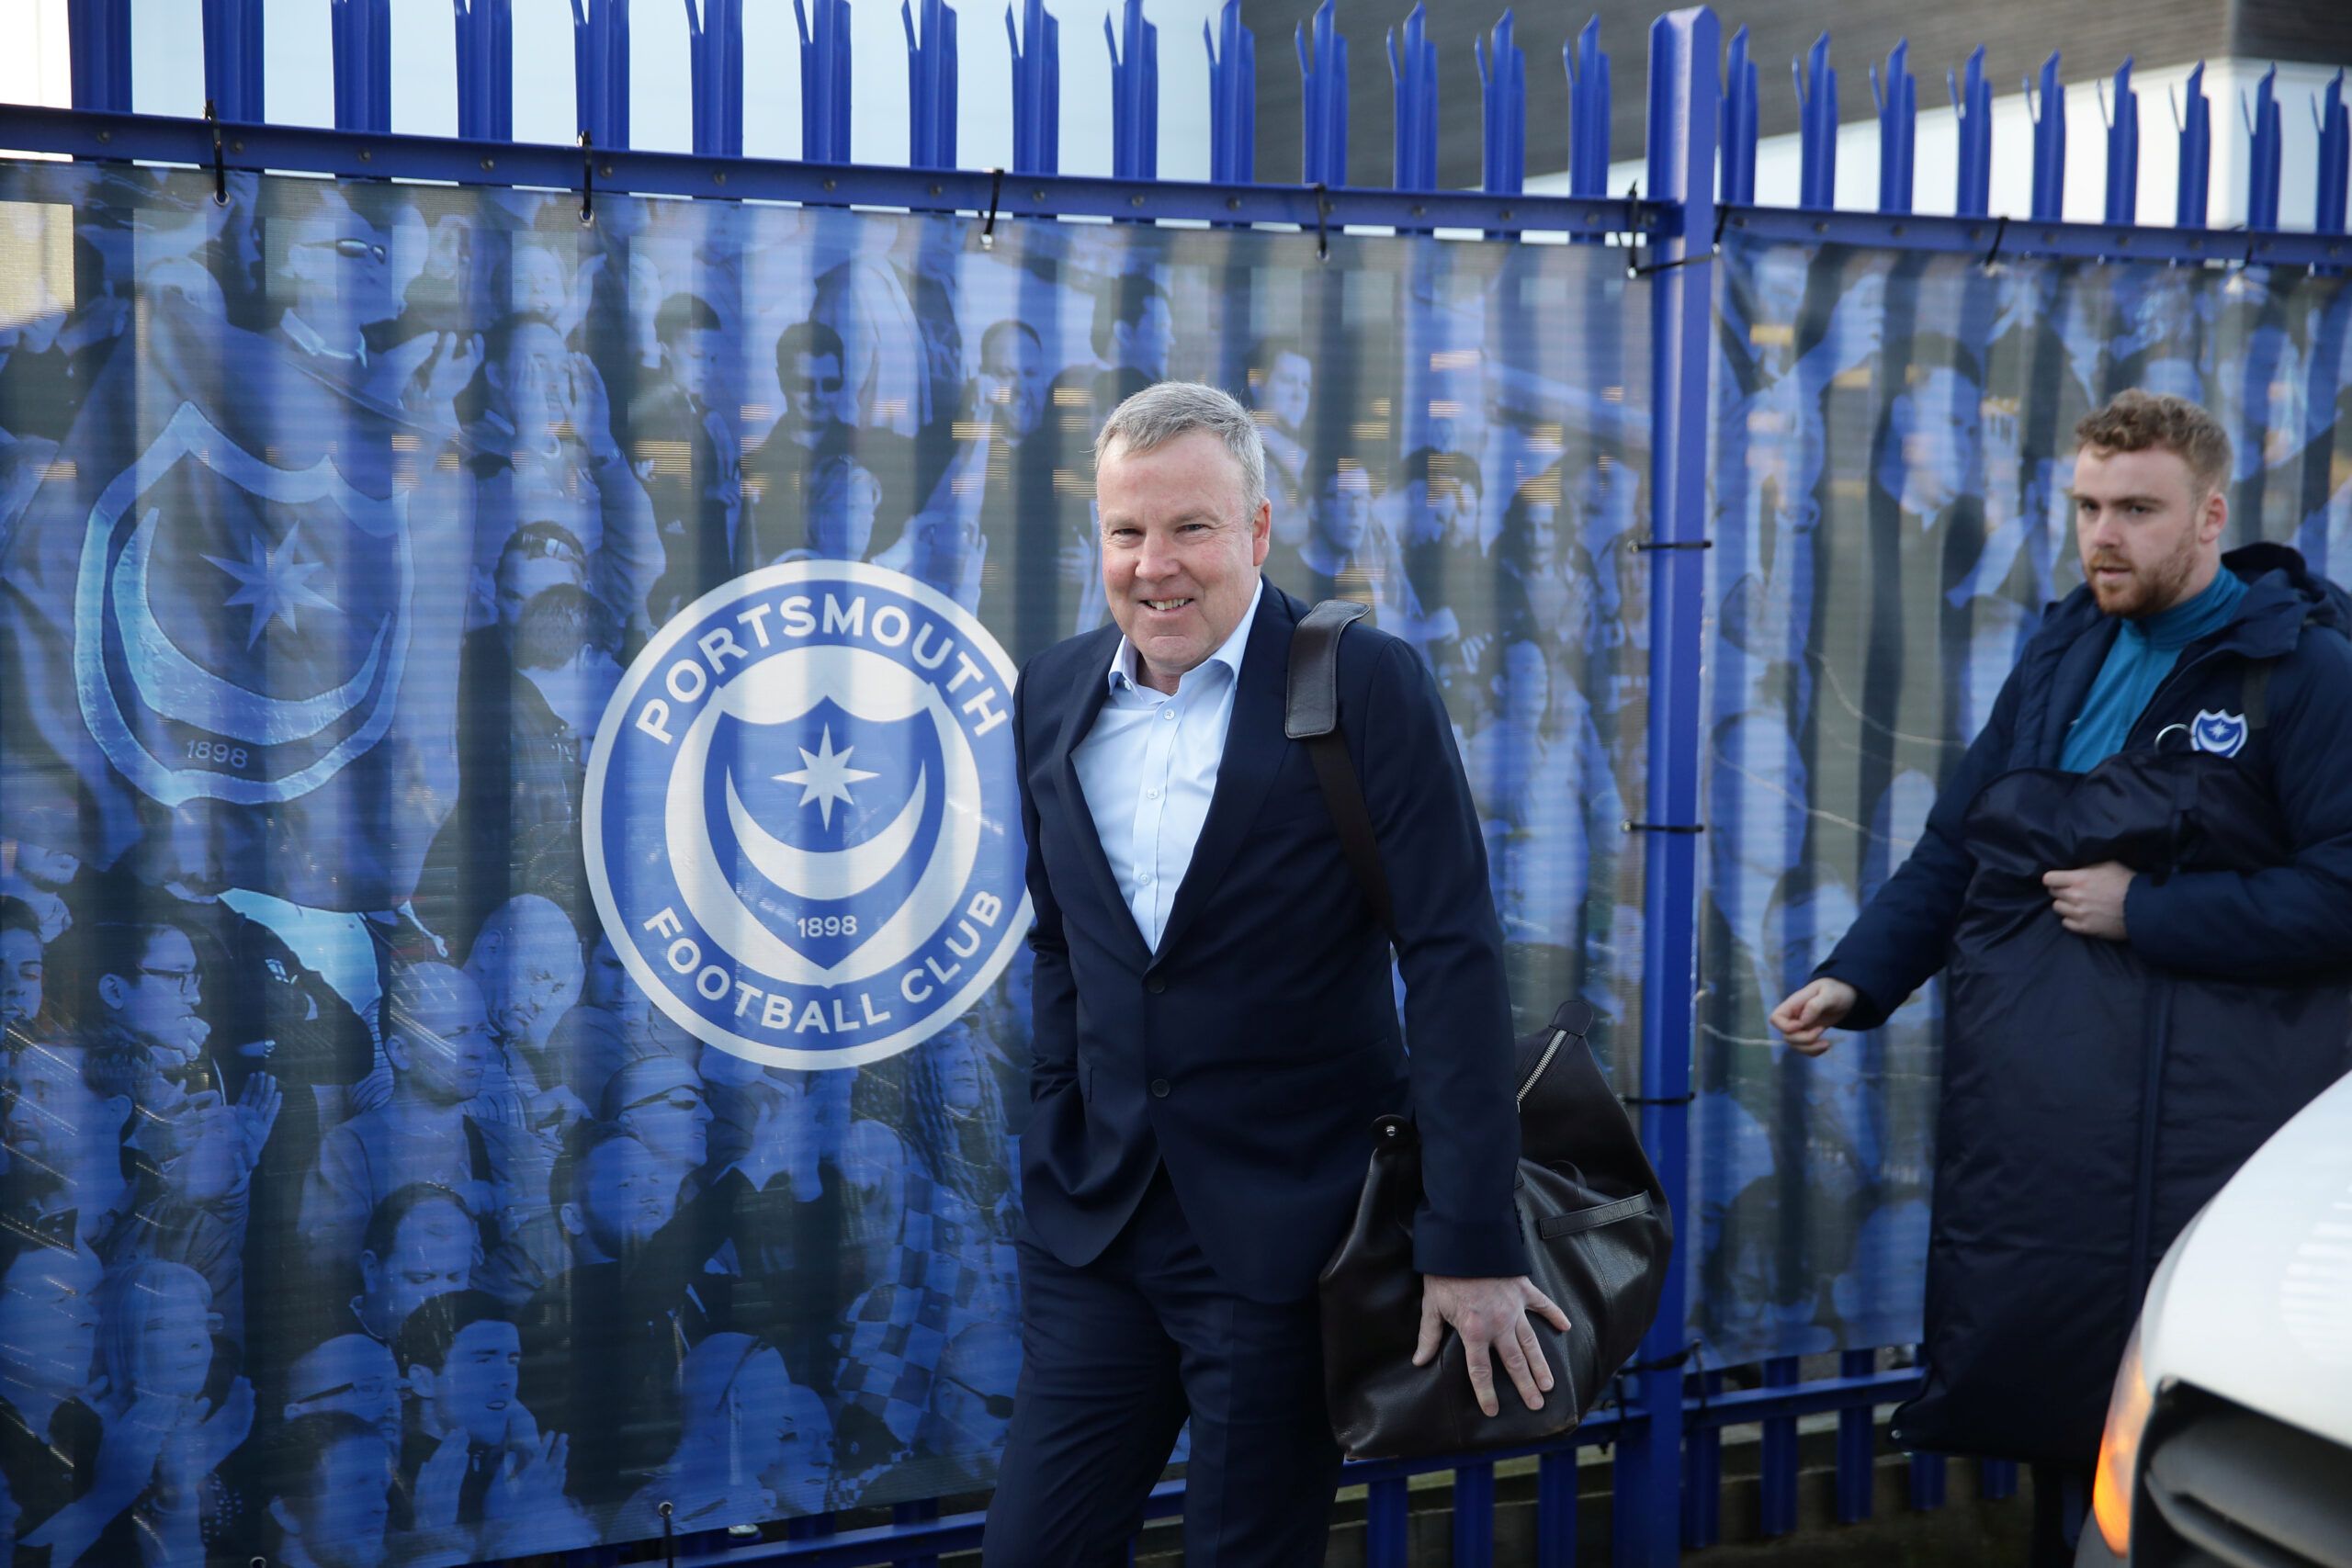 Soccer Football - FA Cup Fifth Round - Portsmouth v Arsenal - Fratton Park, Portsmouth, Britain - March 2, 2020   Portsmouth manager Kenny Jackett arrives at the stadium before the match    REUTERS/David Klein